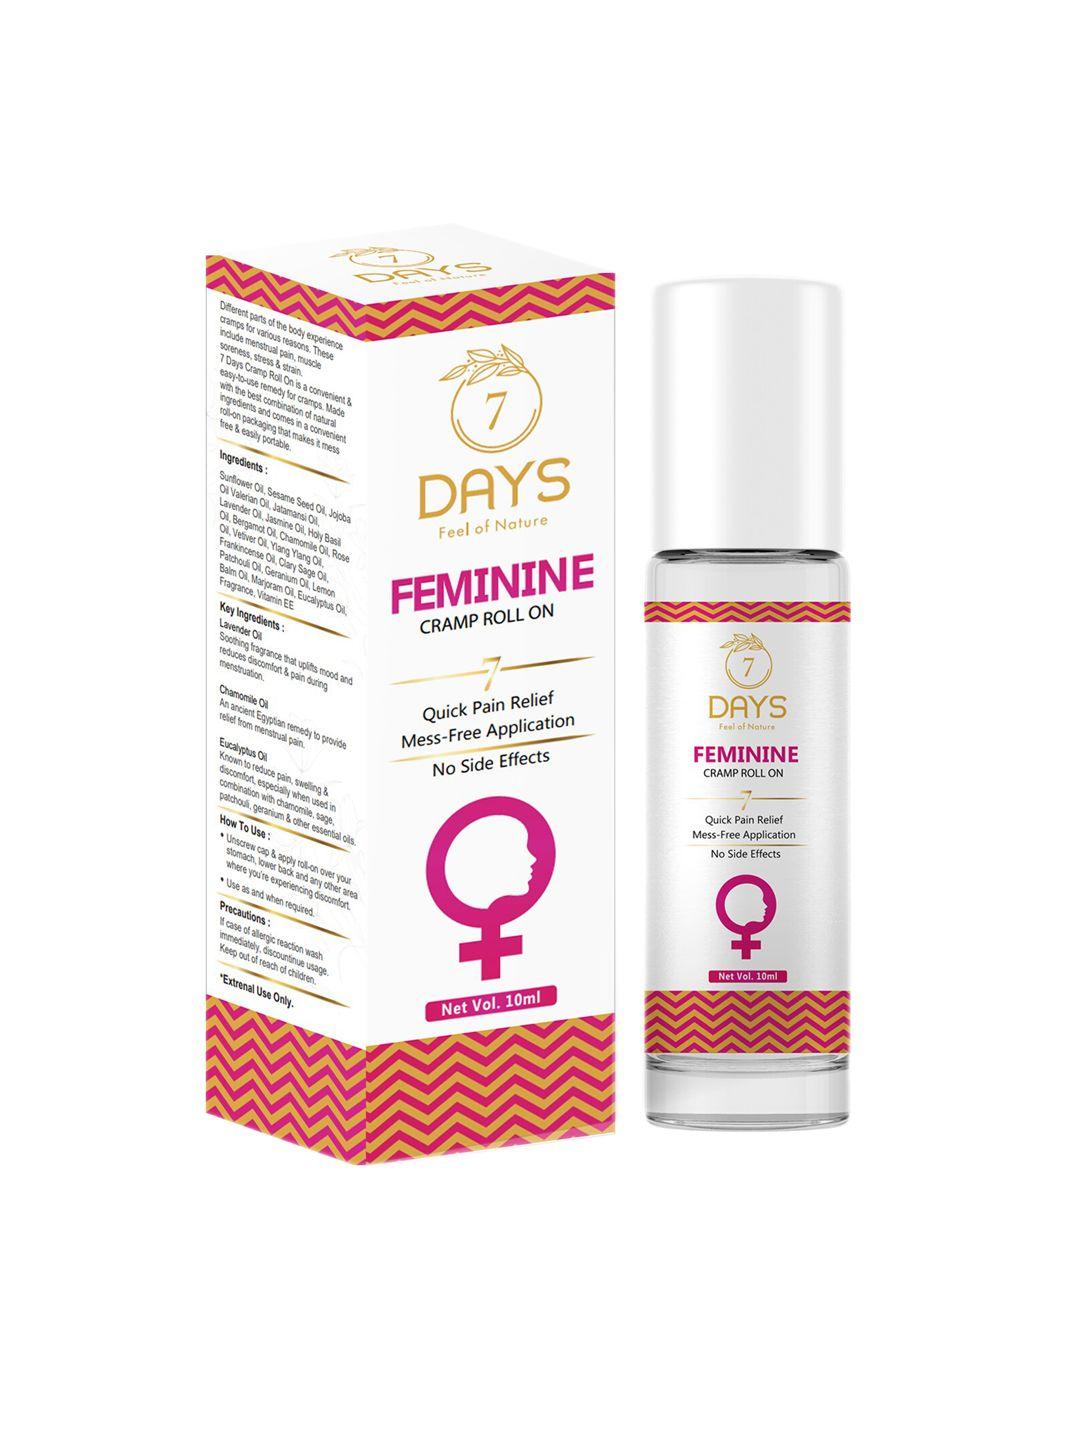 7 days feminine cramp relief roll on for instant relief from period pain - 10 ml